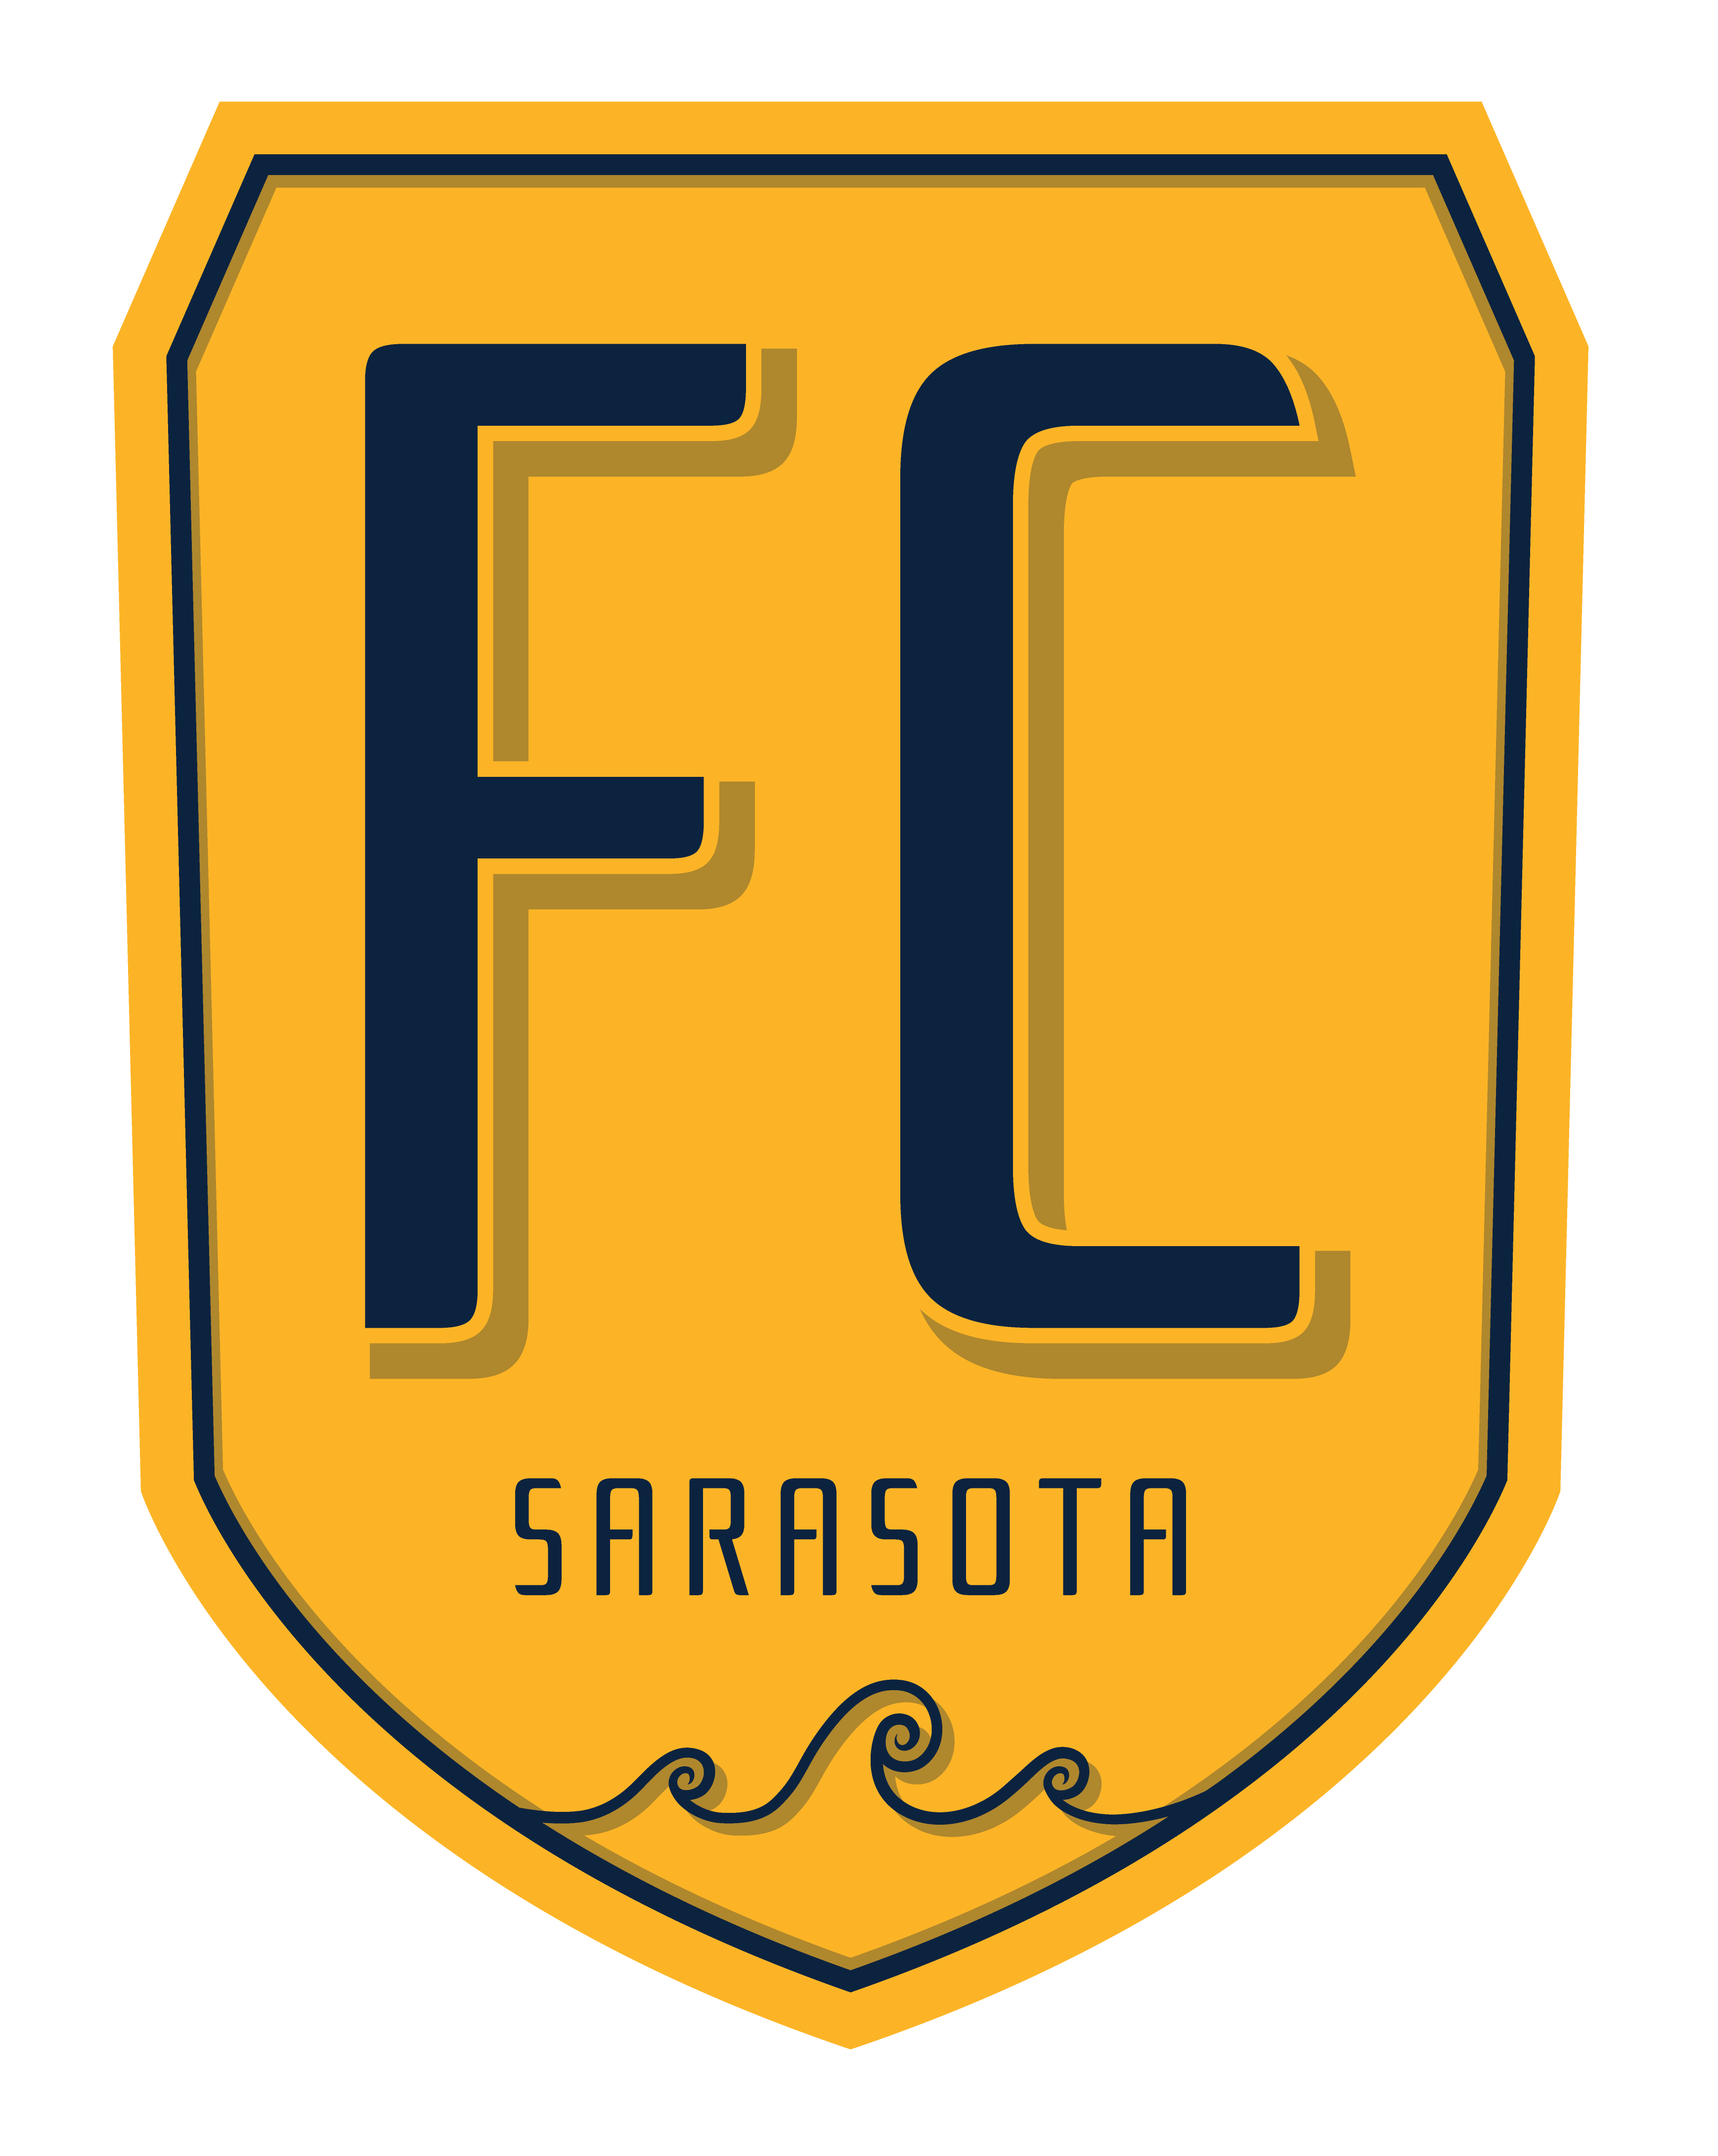 Introducing the FC Sarasota club methodology that will be implemented